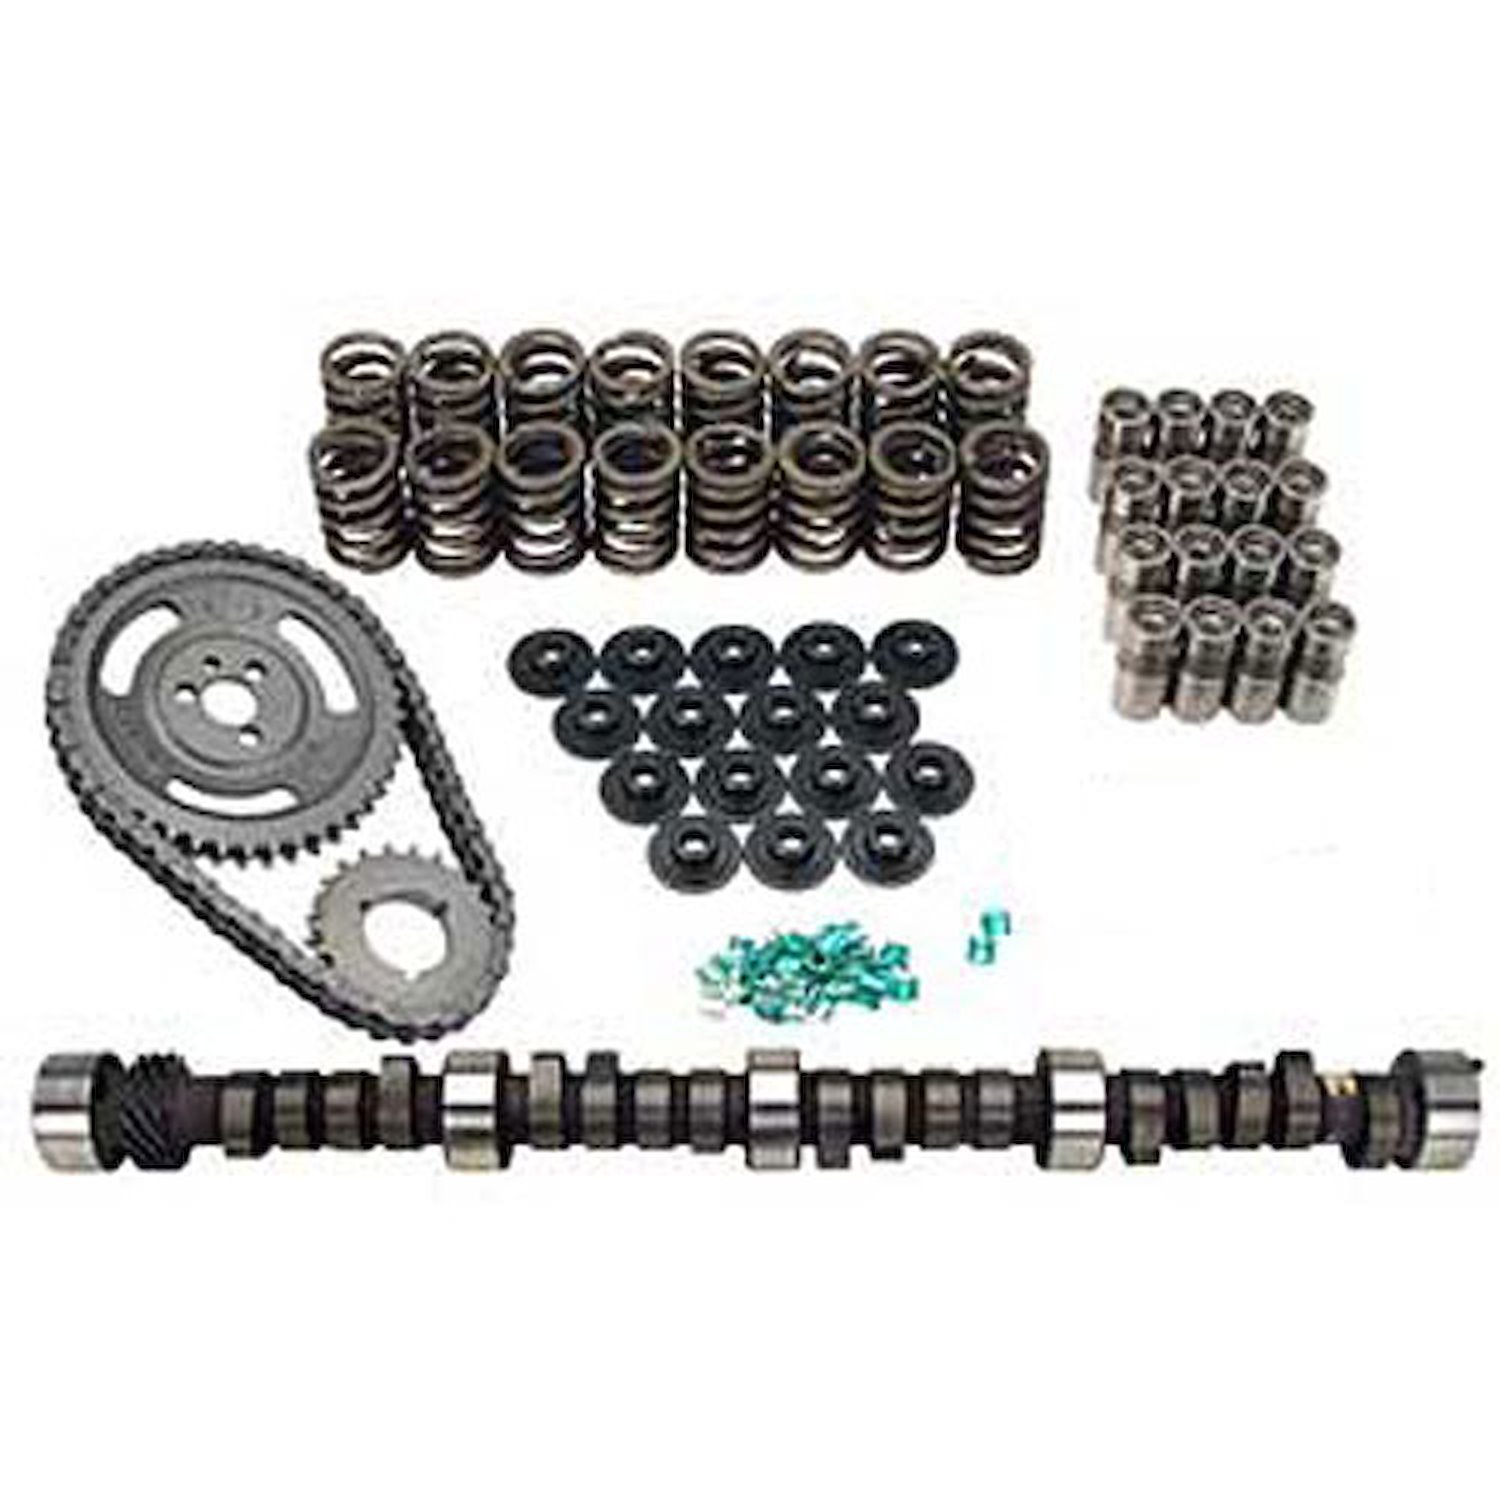 10120703K - Voodoo Hydraulic Flat Tappet Camshaft Kit for Small Block Chevy